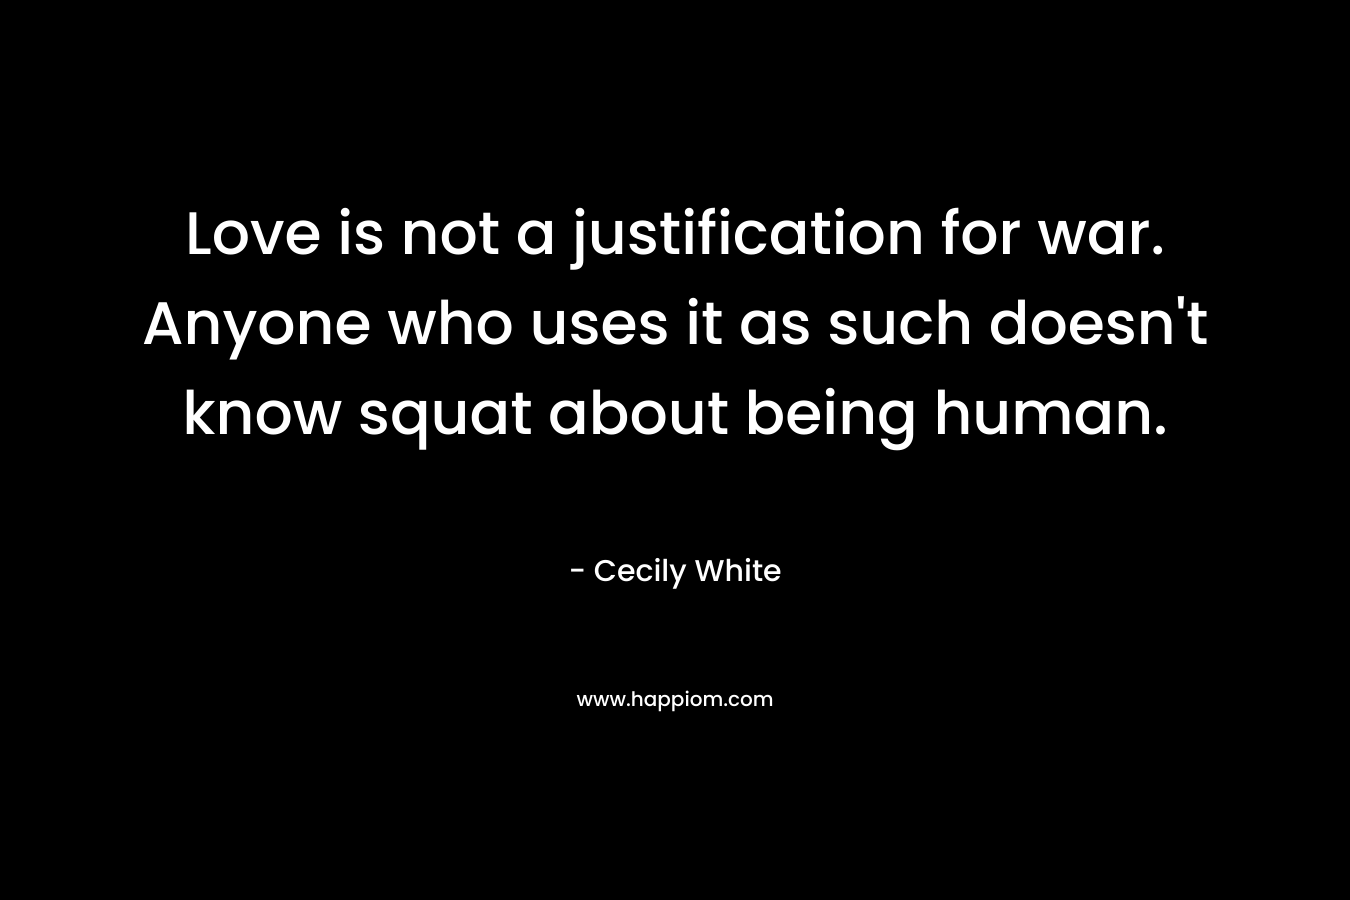 Love is not a justification for war. Anyone who uses it as such doesn't know squat about being human.